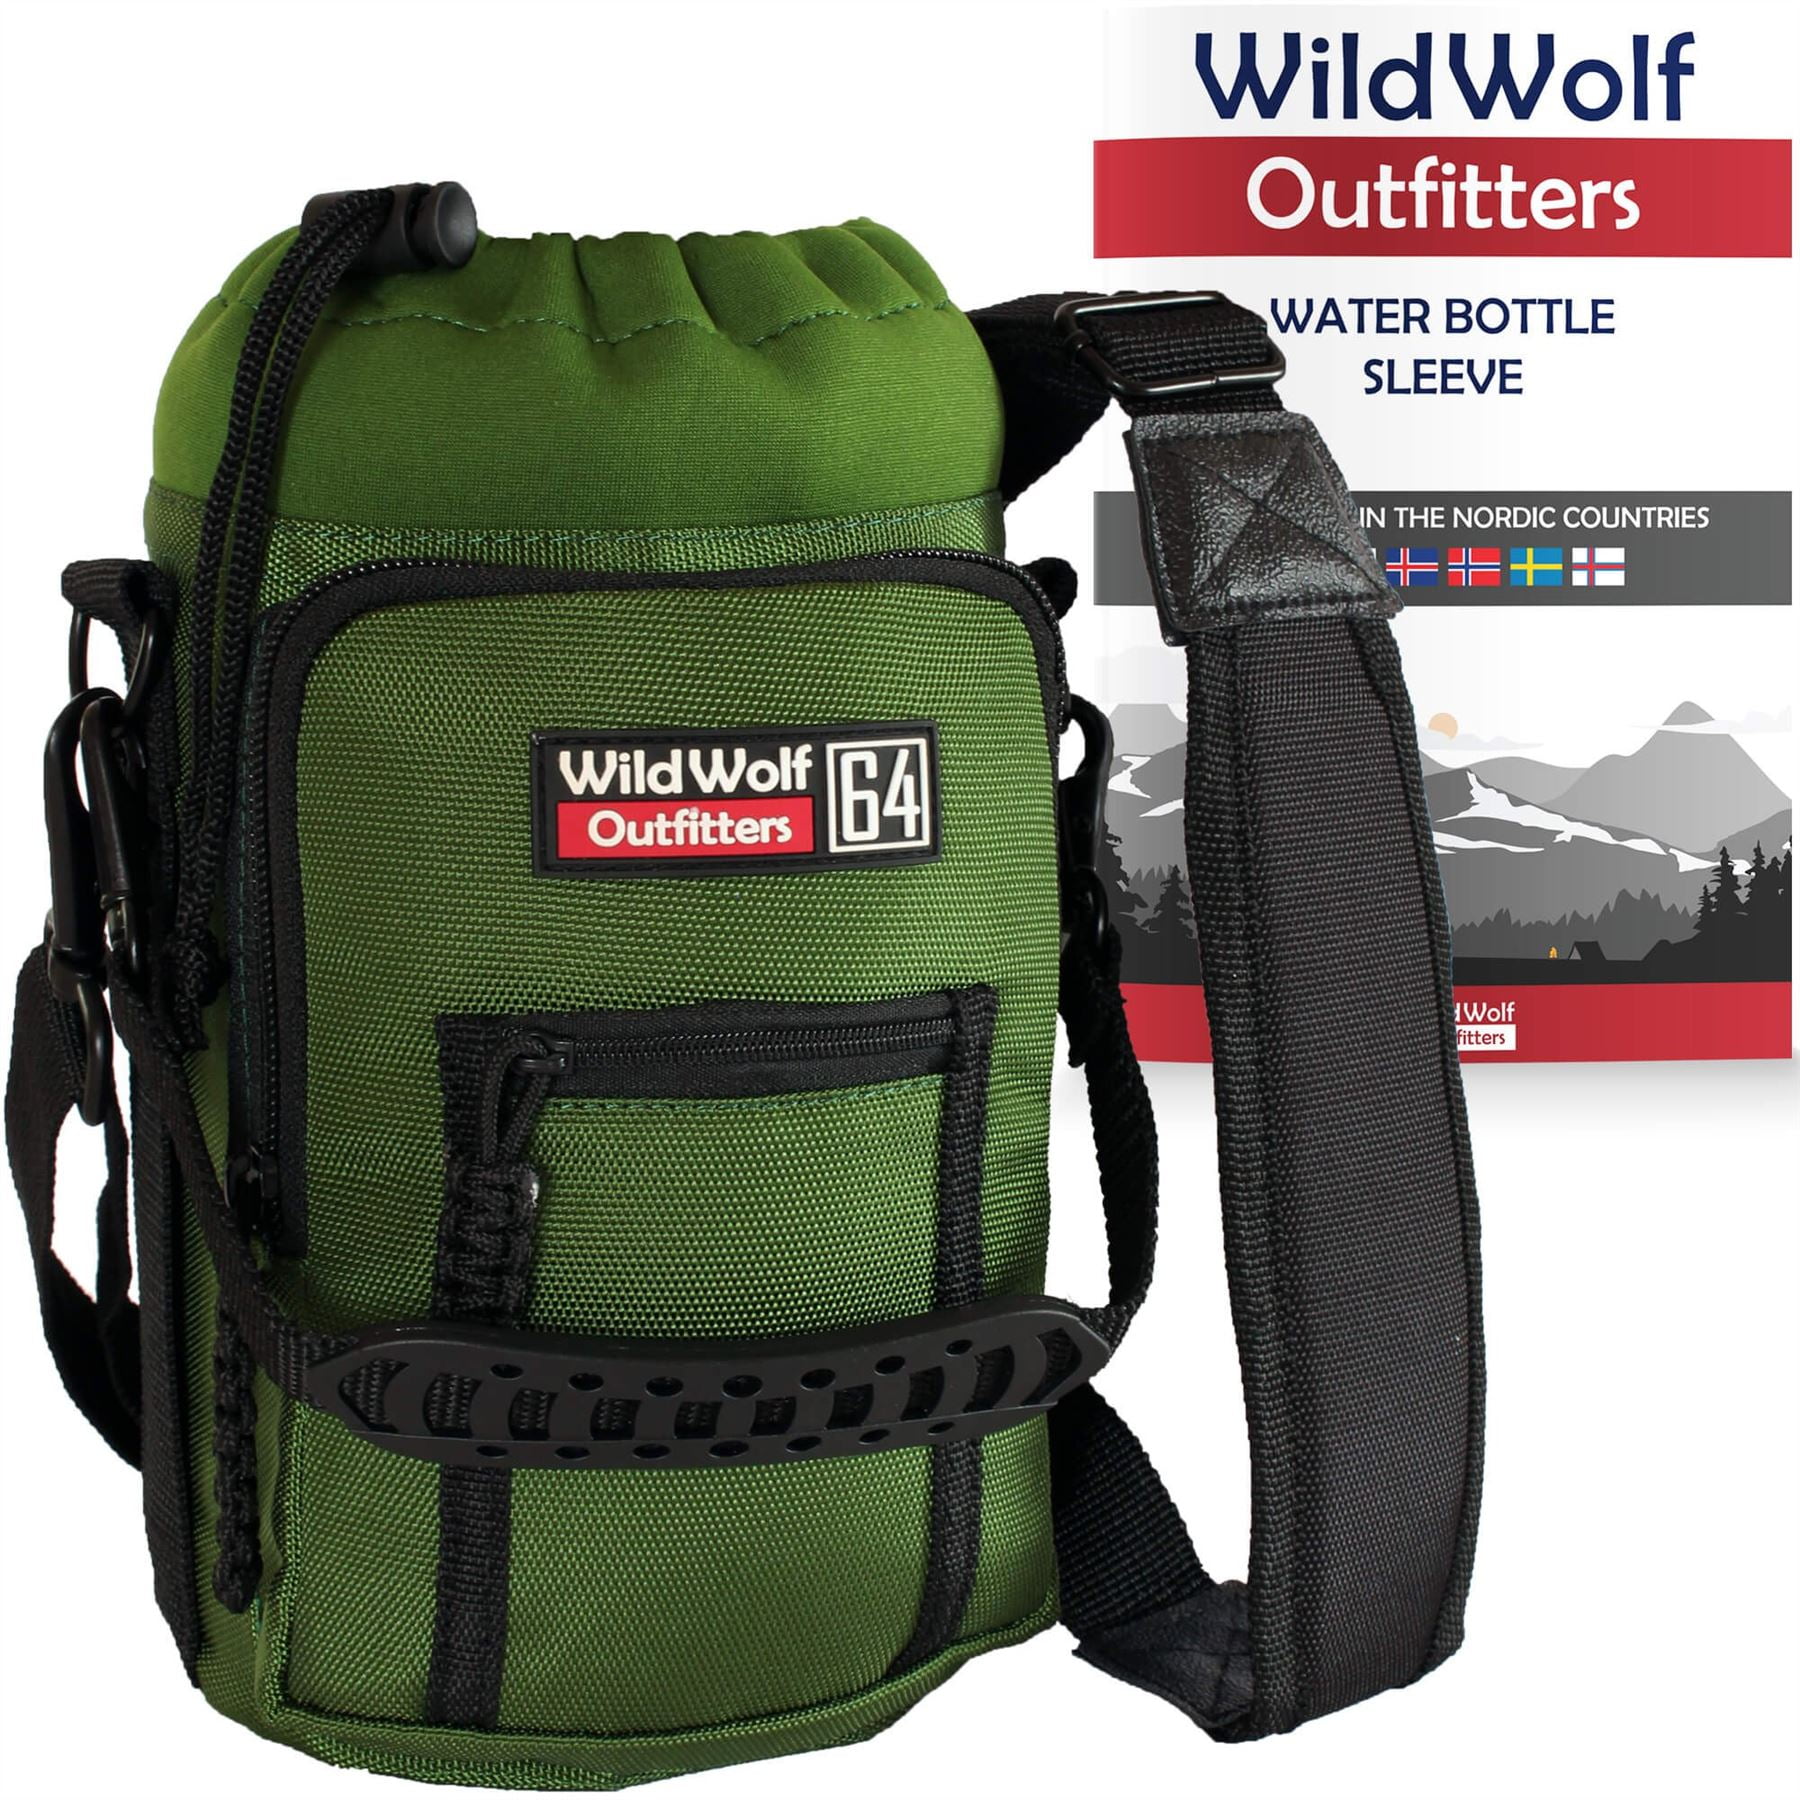 Wild Wolf Outfitters #1 Best Water Bottle Holder for 32 oz Bottles Carry Protect and Insulate Your Flask with This Military Grade Carrier w/ 2 Pockets and an Adjustable Padded Shoulder Strap. 